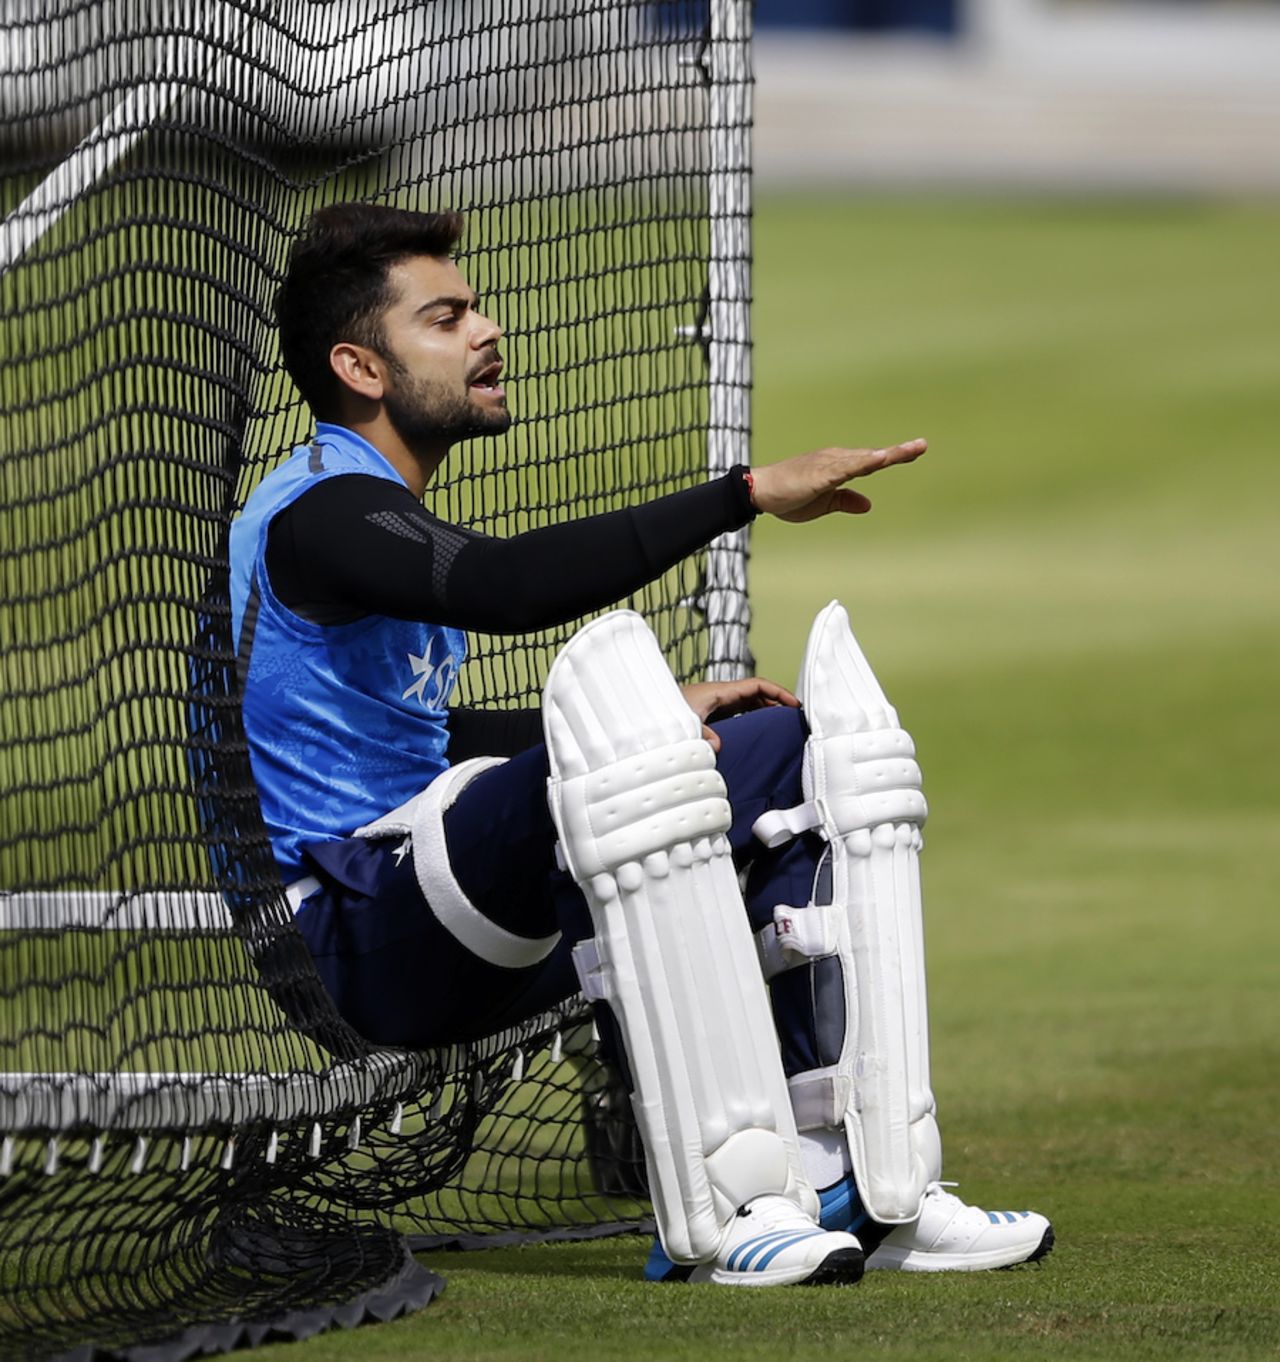 Cornered: Virat Kohli gestures during a training session at The Lord's, London, July 15, 2014